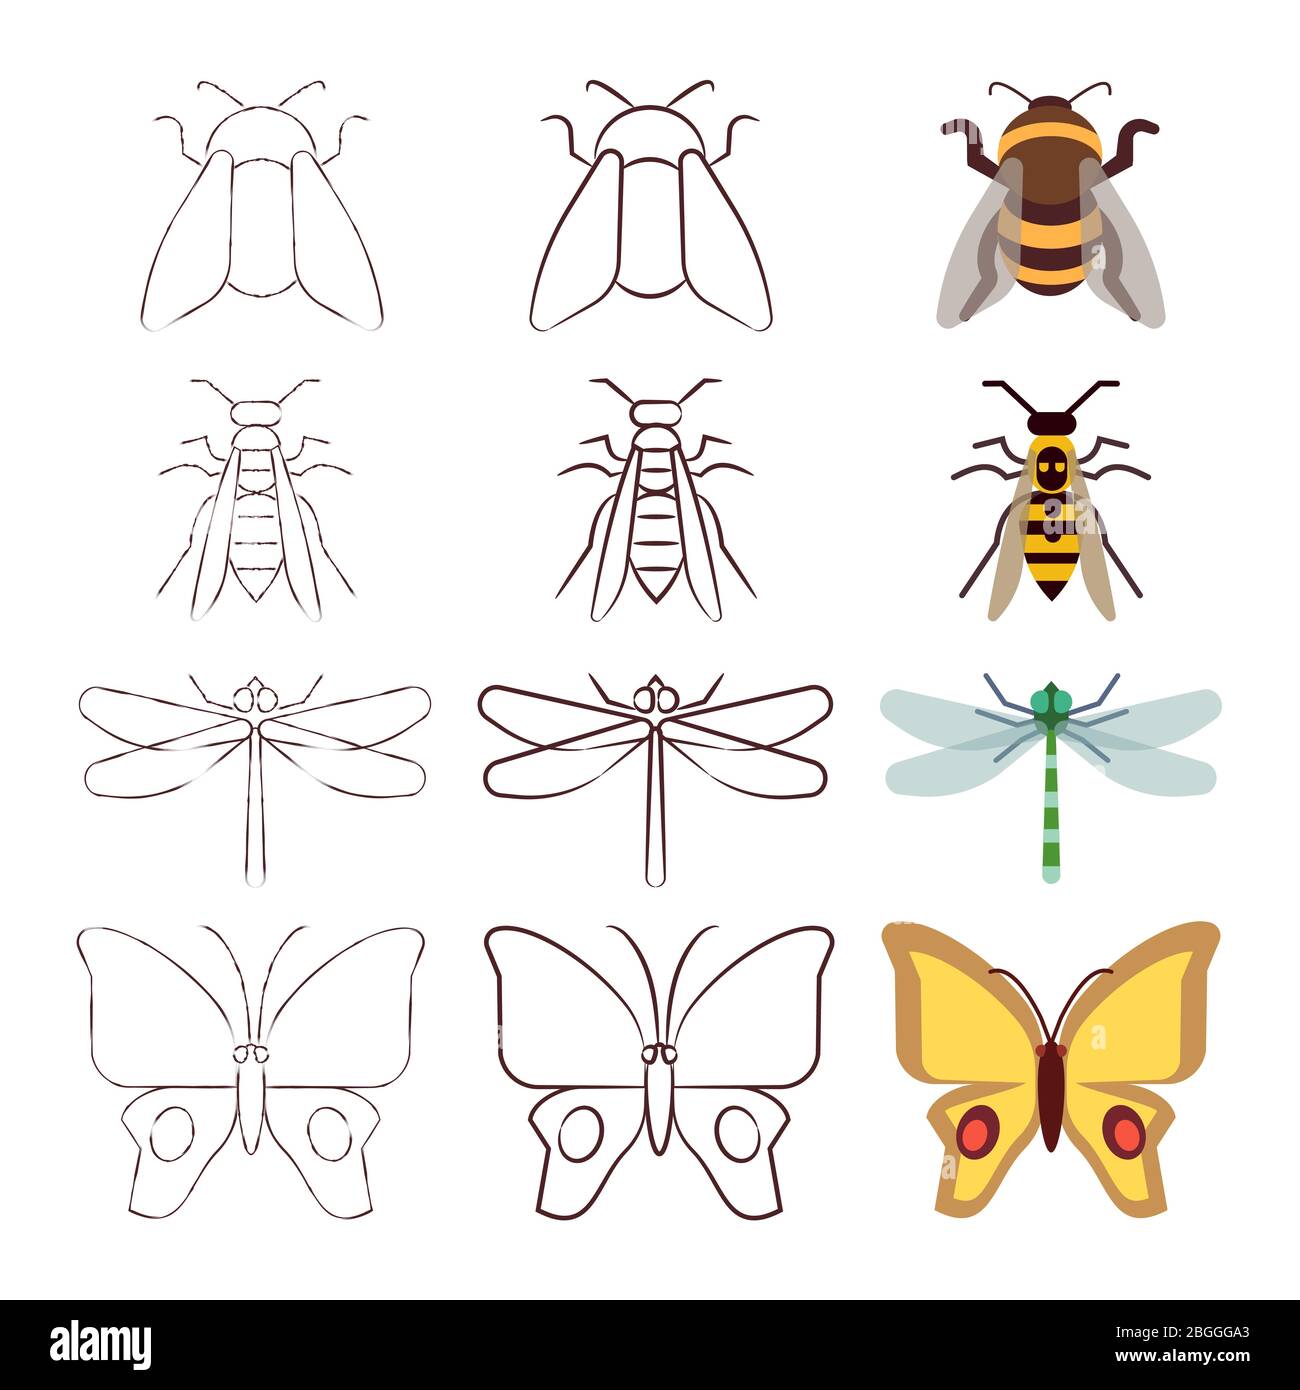 Drawing Insects | Smithsonian Institution